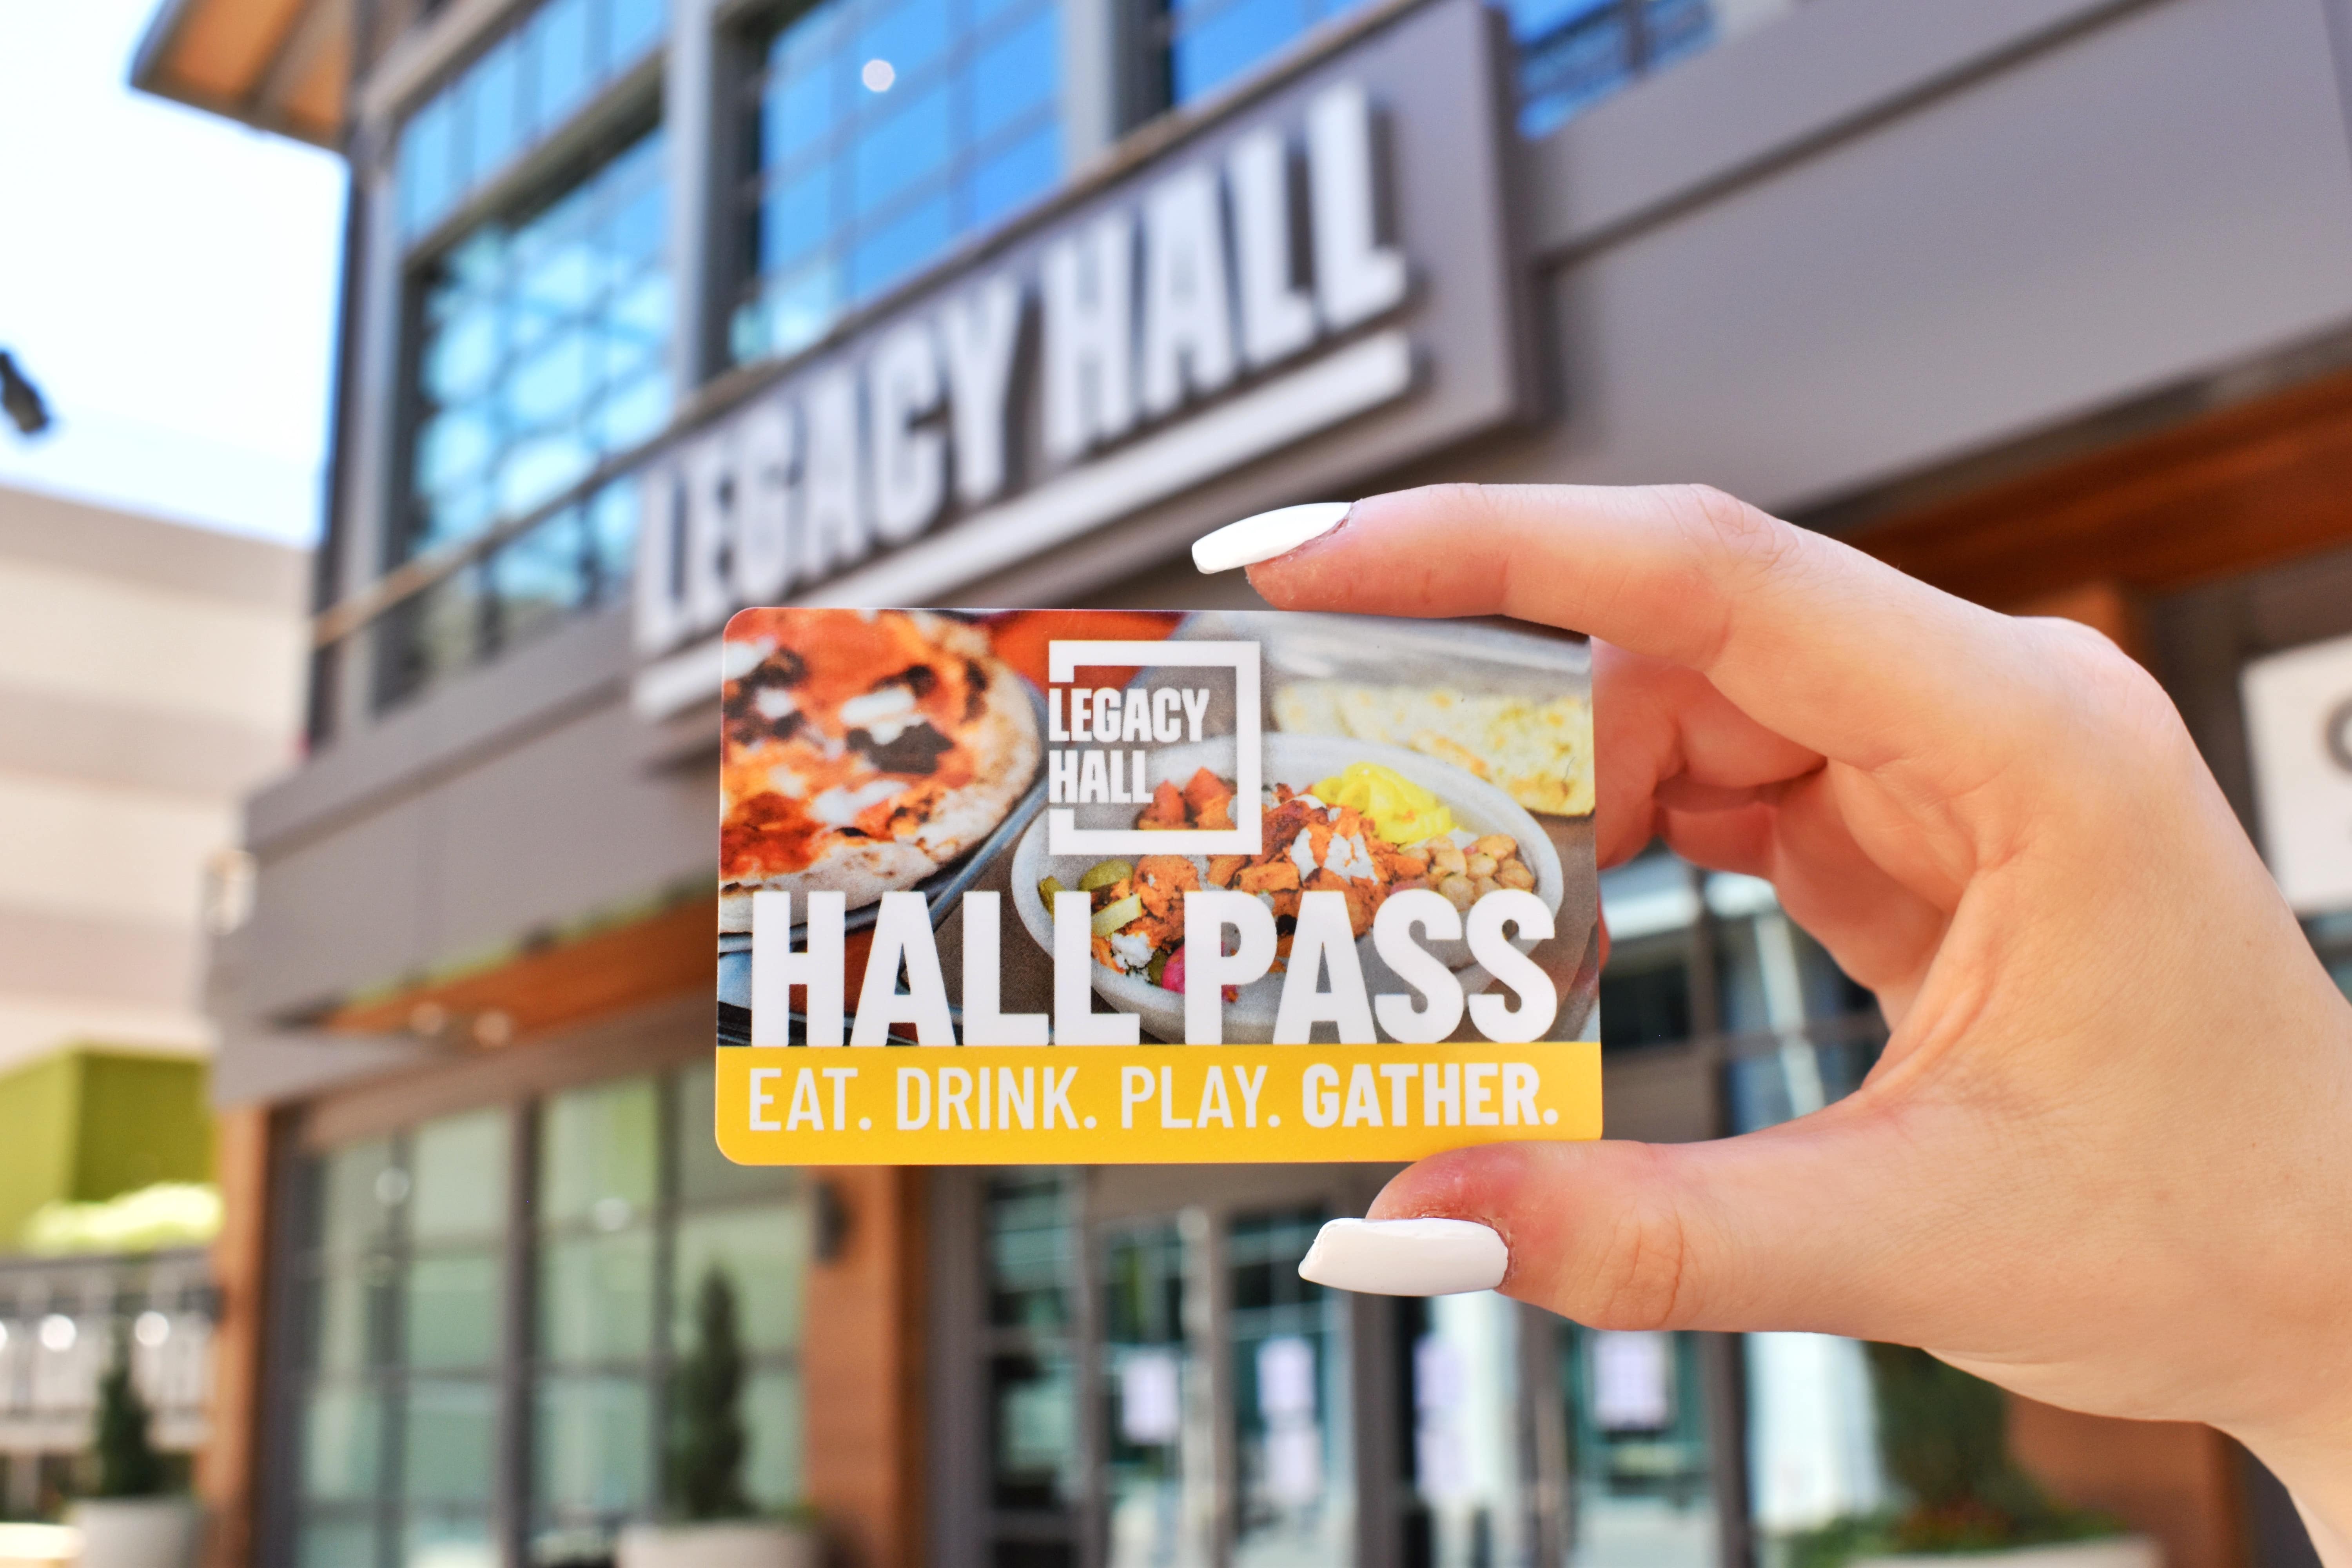 Photograph of the Hall Pass card.